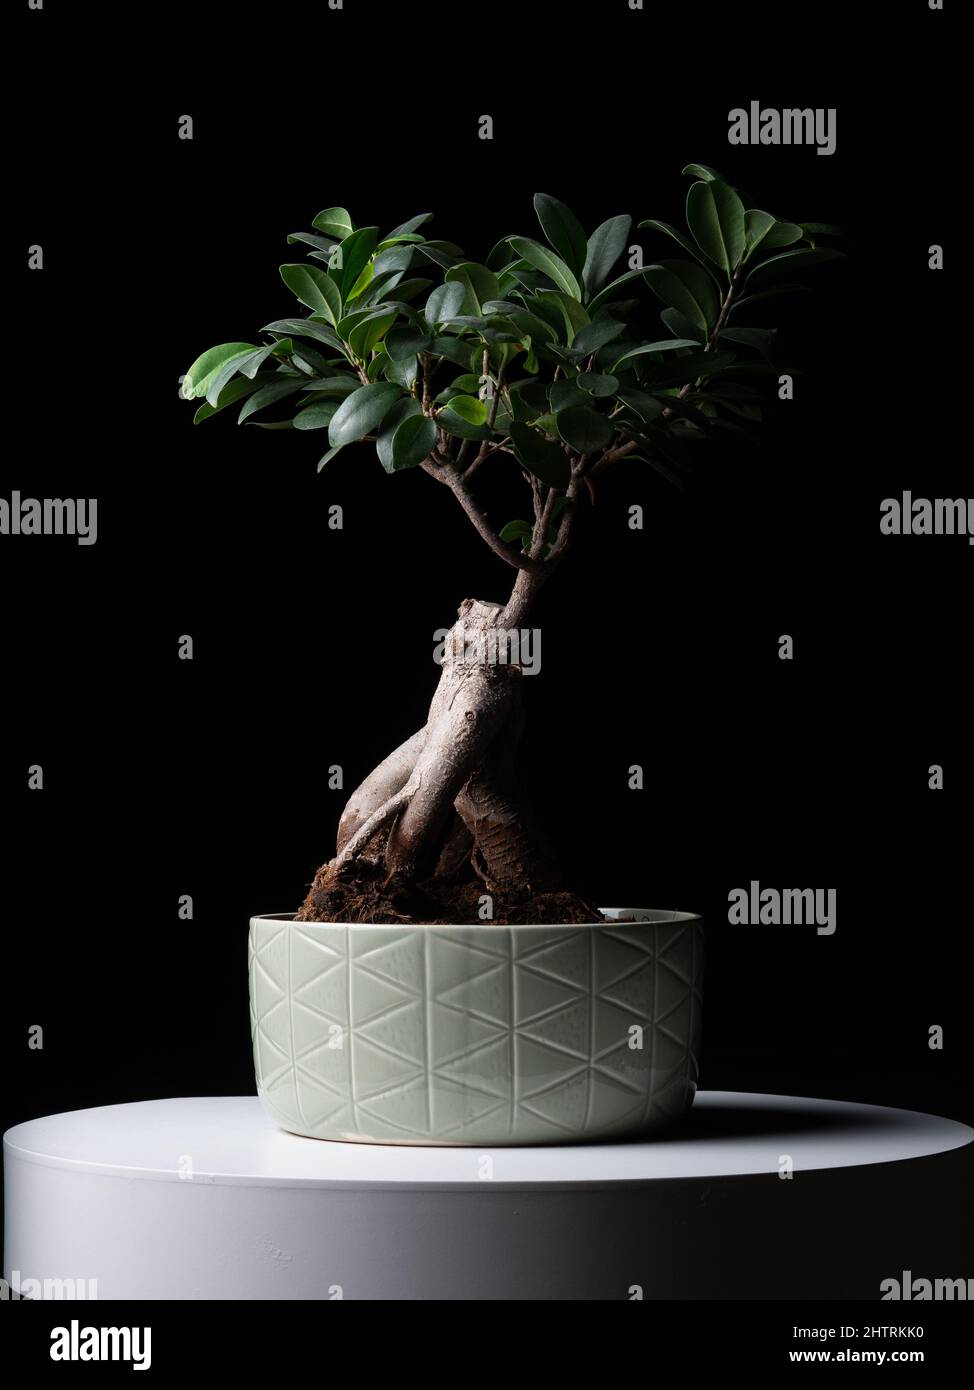 Vertical shot of a bonsai in a white pot on a white table against a black background Stock Photo